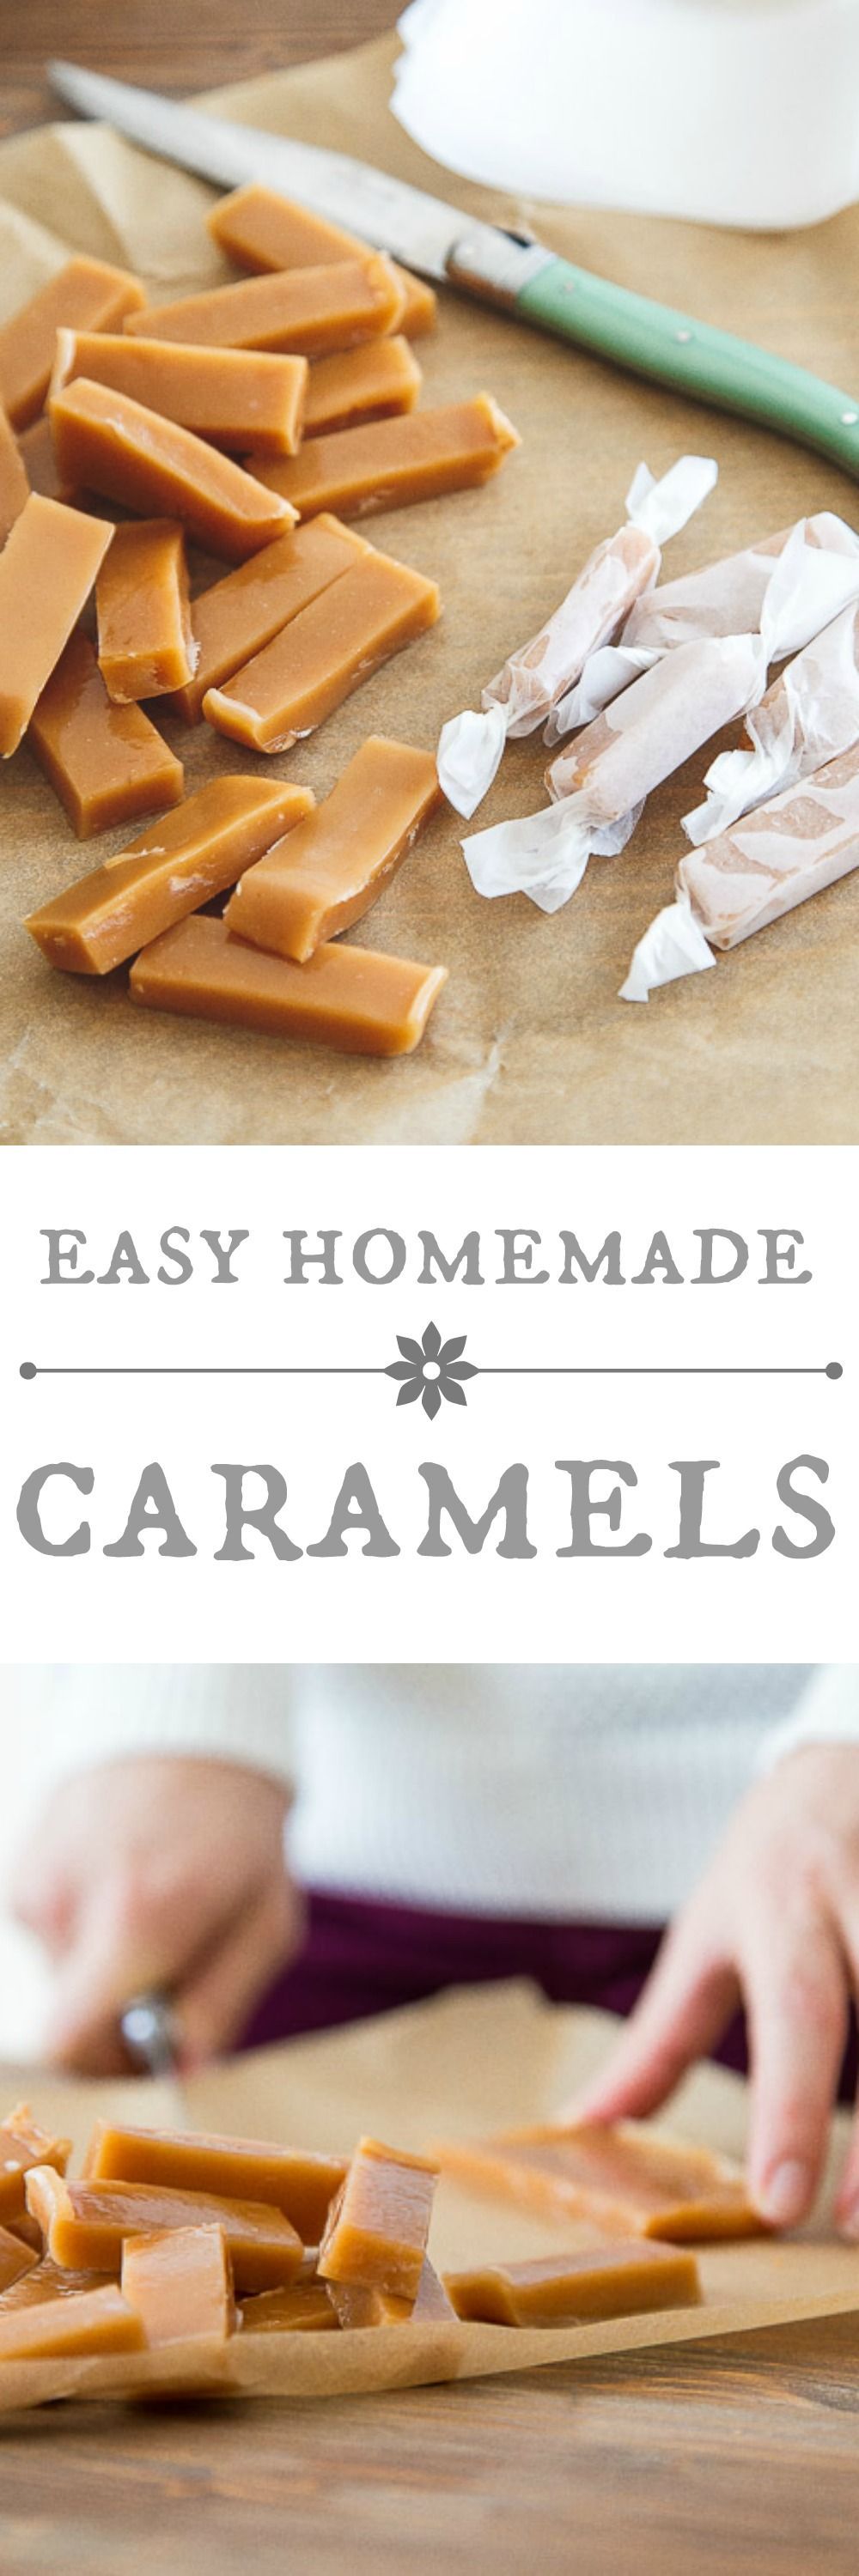 Easy homemade caramels. Small batch recipe. Small batch candy. Great food gift recipe! @DessertForTwo